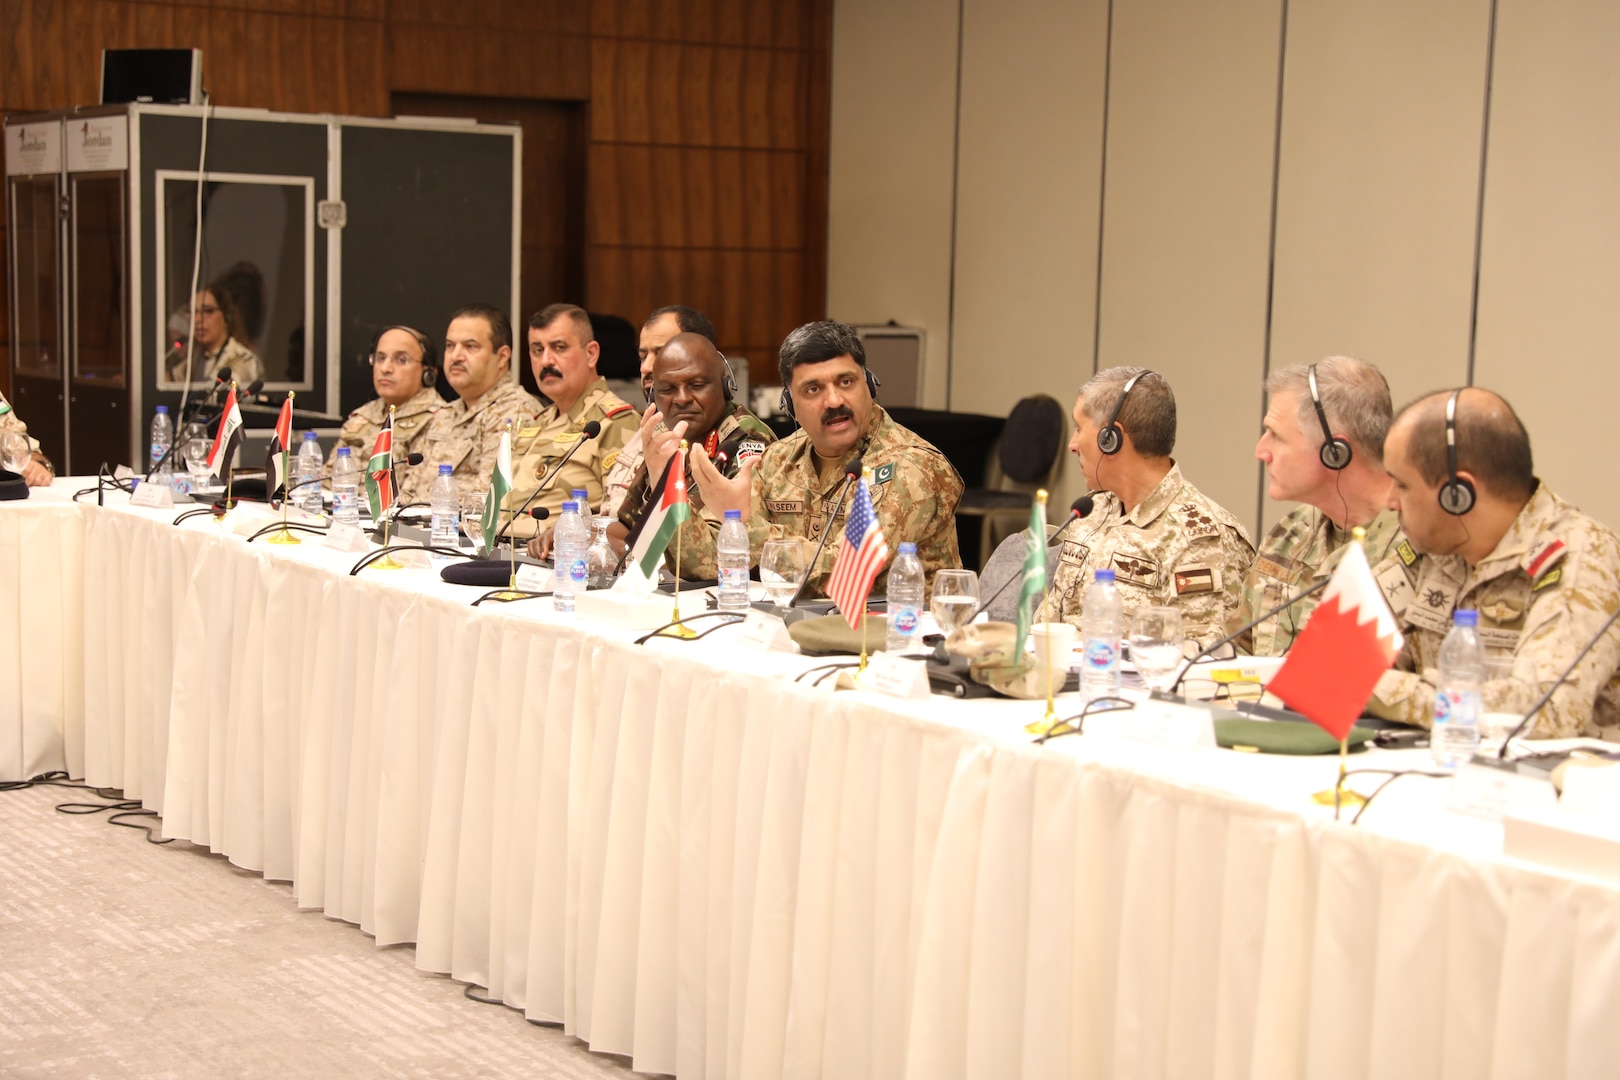 Senior military leaders from 28 partner nations discuss common security concerns at the senior leader seminar during Eager Lion, Sept. 13, 2022, in Amman, Jordan. More than 5,000 individuals from 28 partner nations participated in the multilateral U.S. Central Command Eager Lion 22 exercise, Sept. 4-15, 2022 in Amman, Jordan. In addition to being a platform for senior leaders to discuss issues and concerns, the SLS served as an opportunity for leaders to share ‘best practices’ by exchanging the knowledge and skills required to manage and lead effectively in complex environments. (U.S. Army photo by Cpt. Olivia Cobiskey)